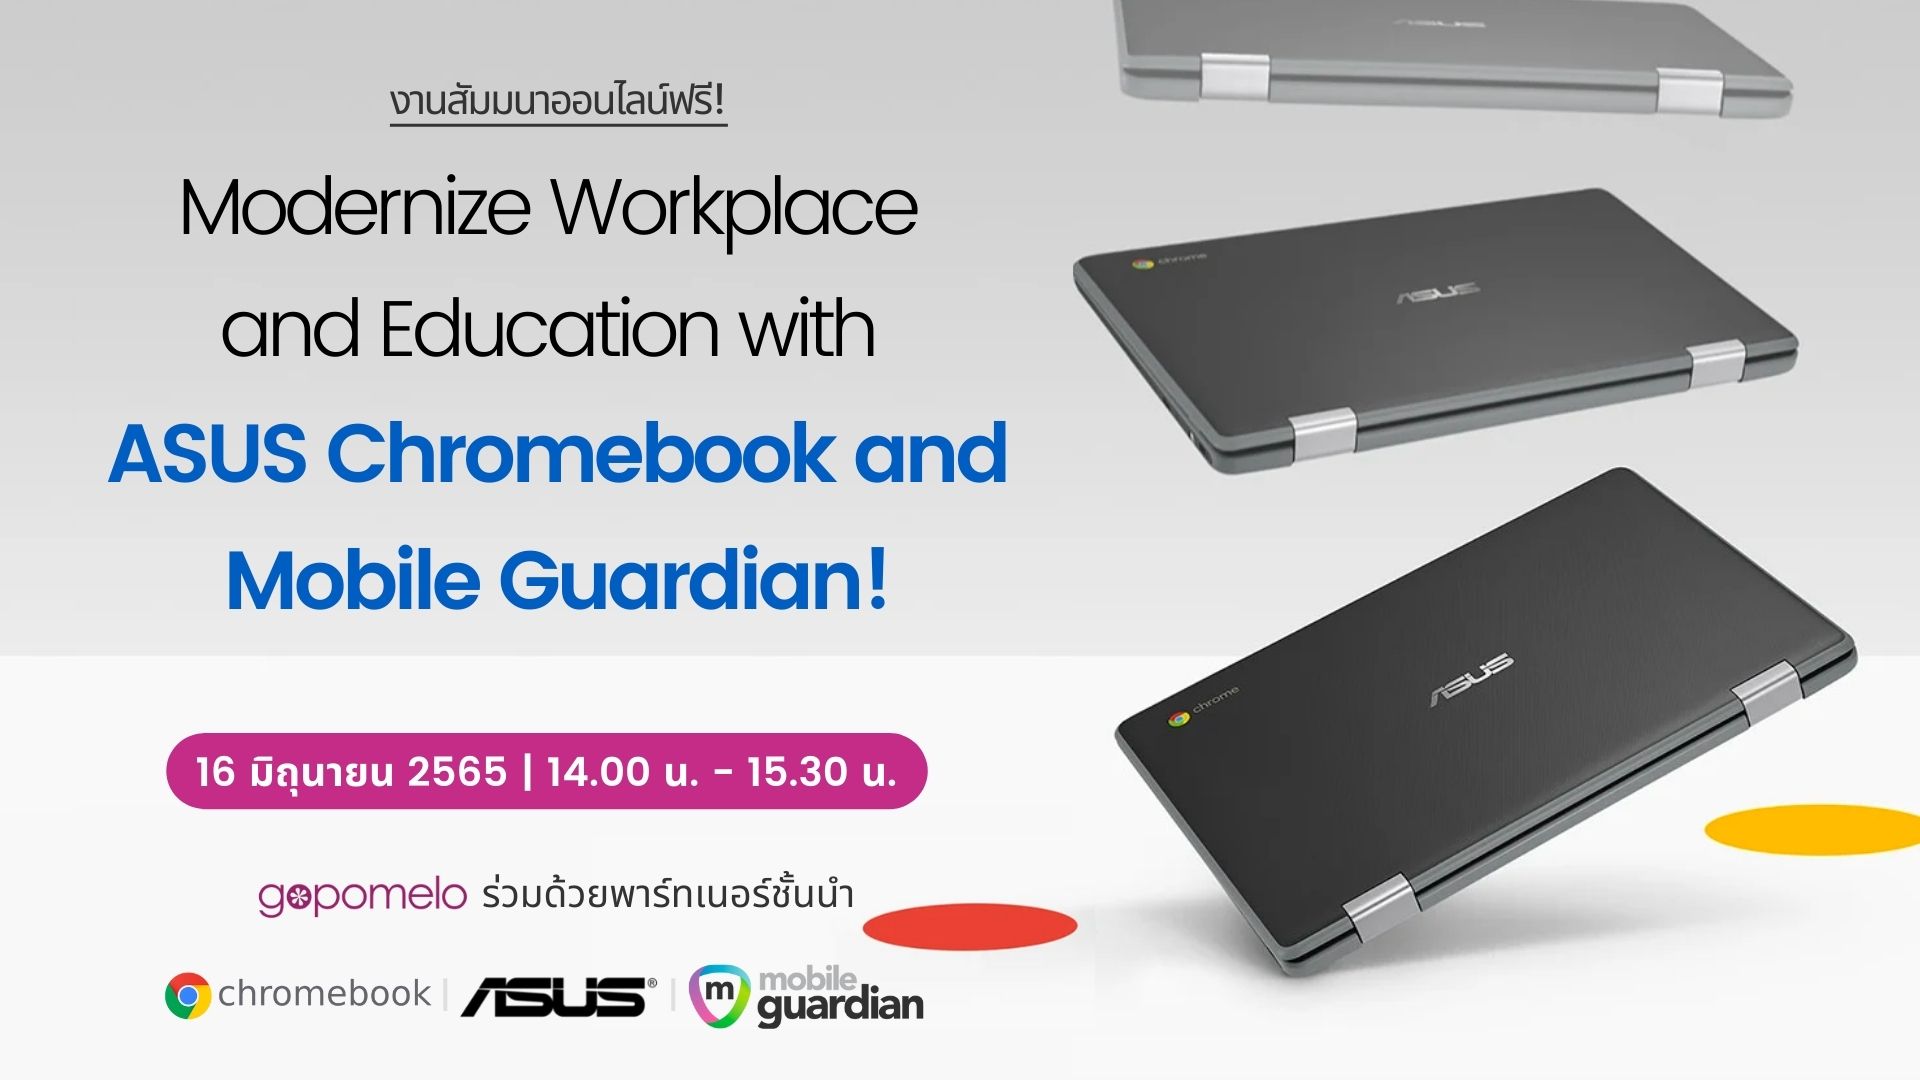 Modernize Workplace and Education with ASUS Chromebook and Mobile Guardian!